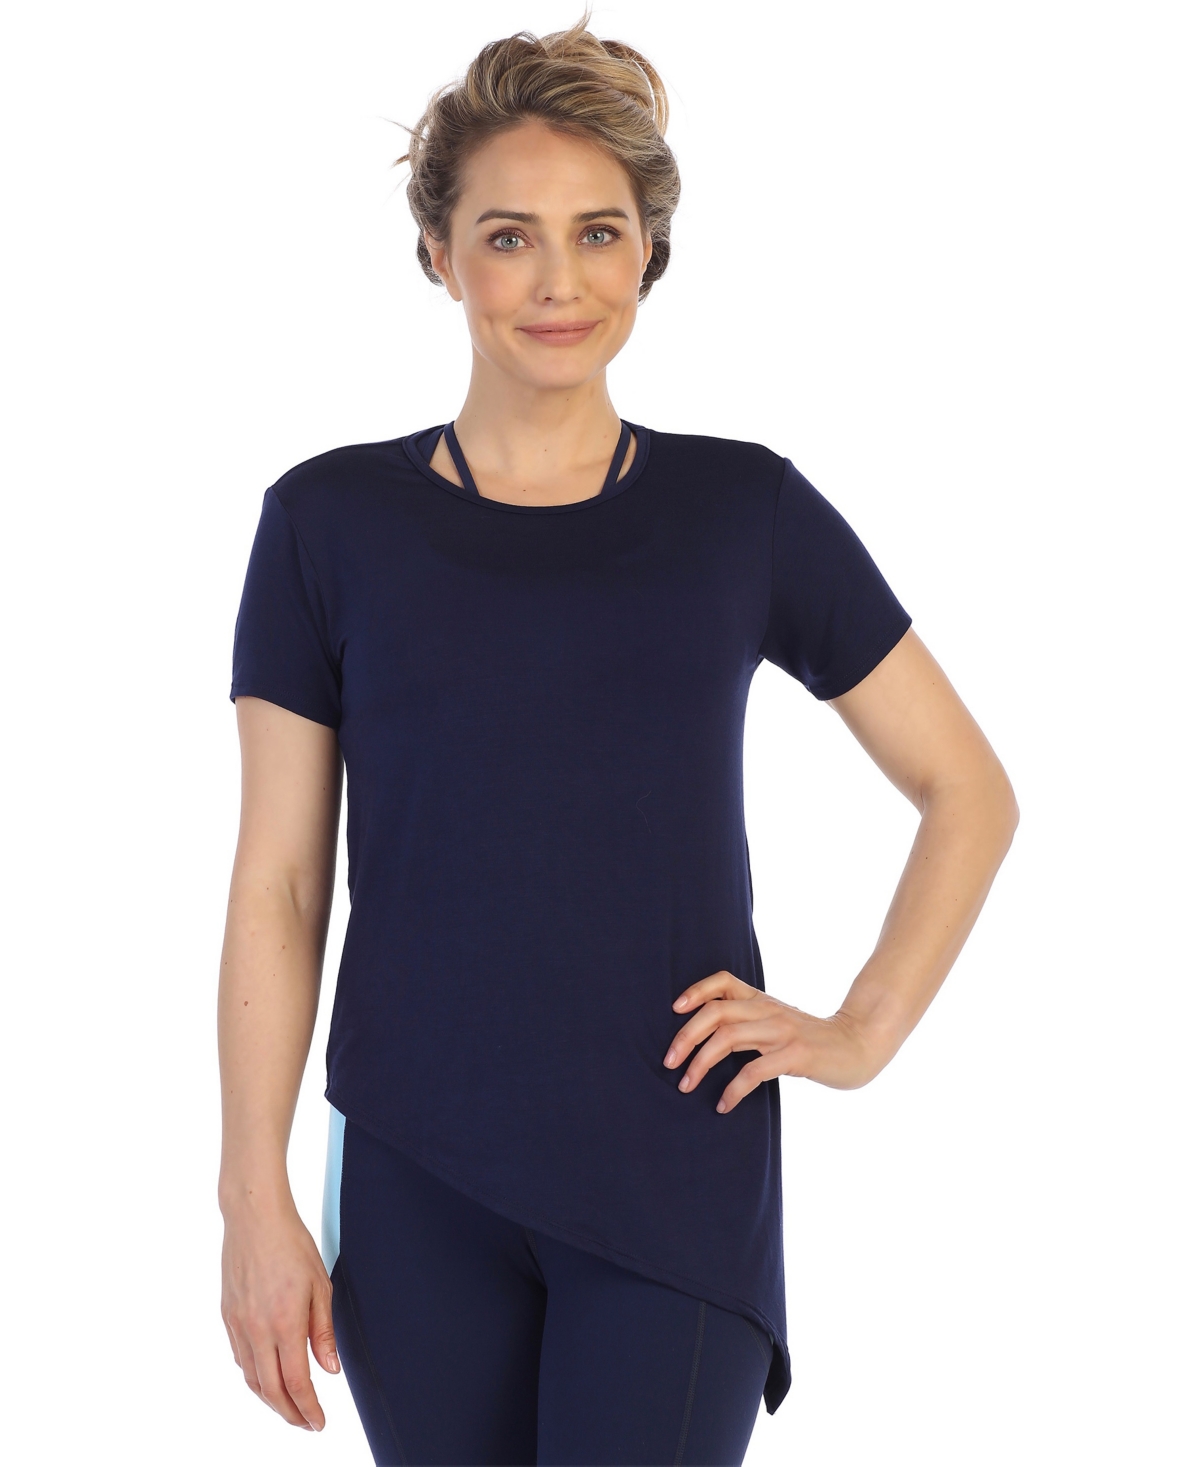 American Fitness Couture Rayon made from Organic Bamboo Side Tie Studio Tee